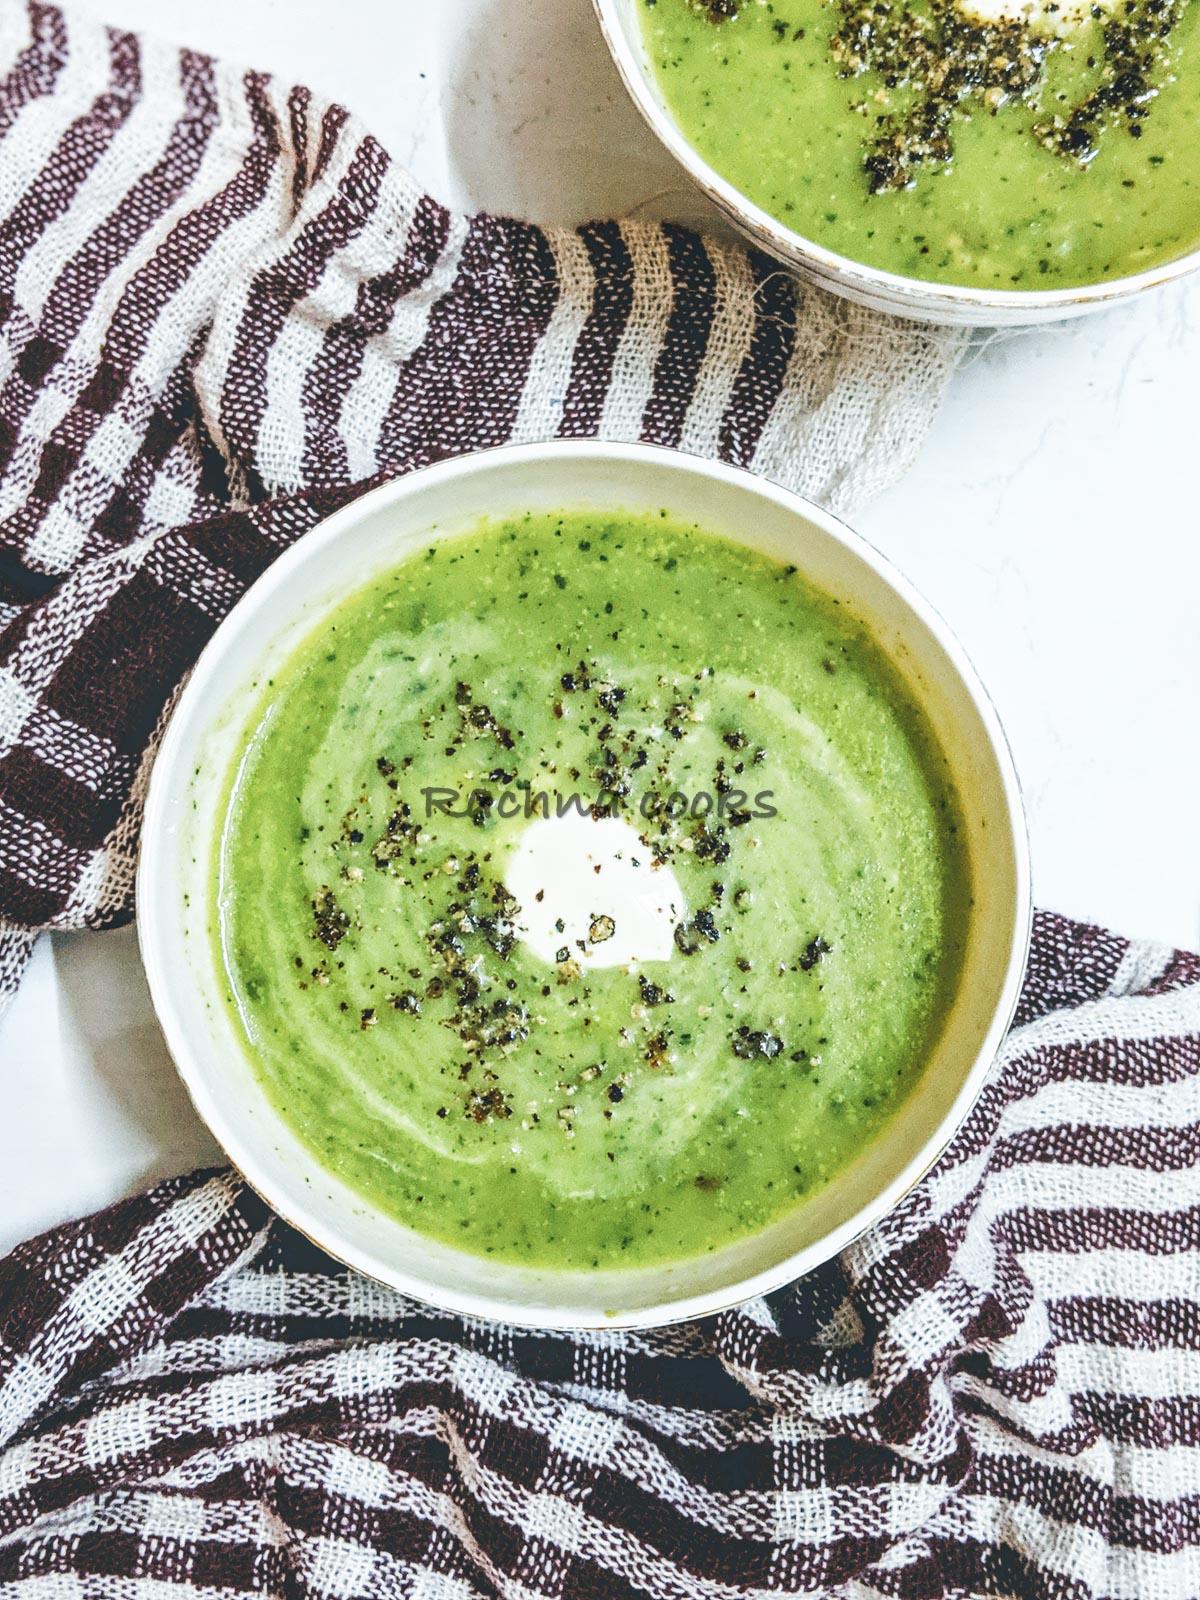 Delicious green zucchini soup bowls with a dollop of cream and garnished with pepper.